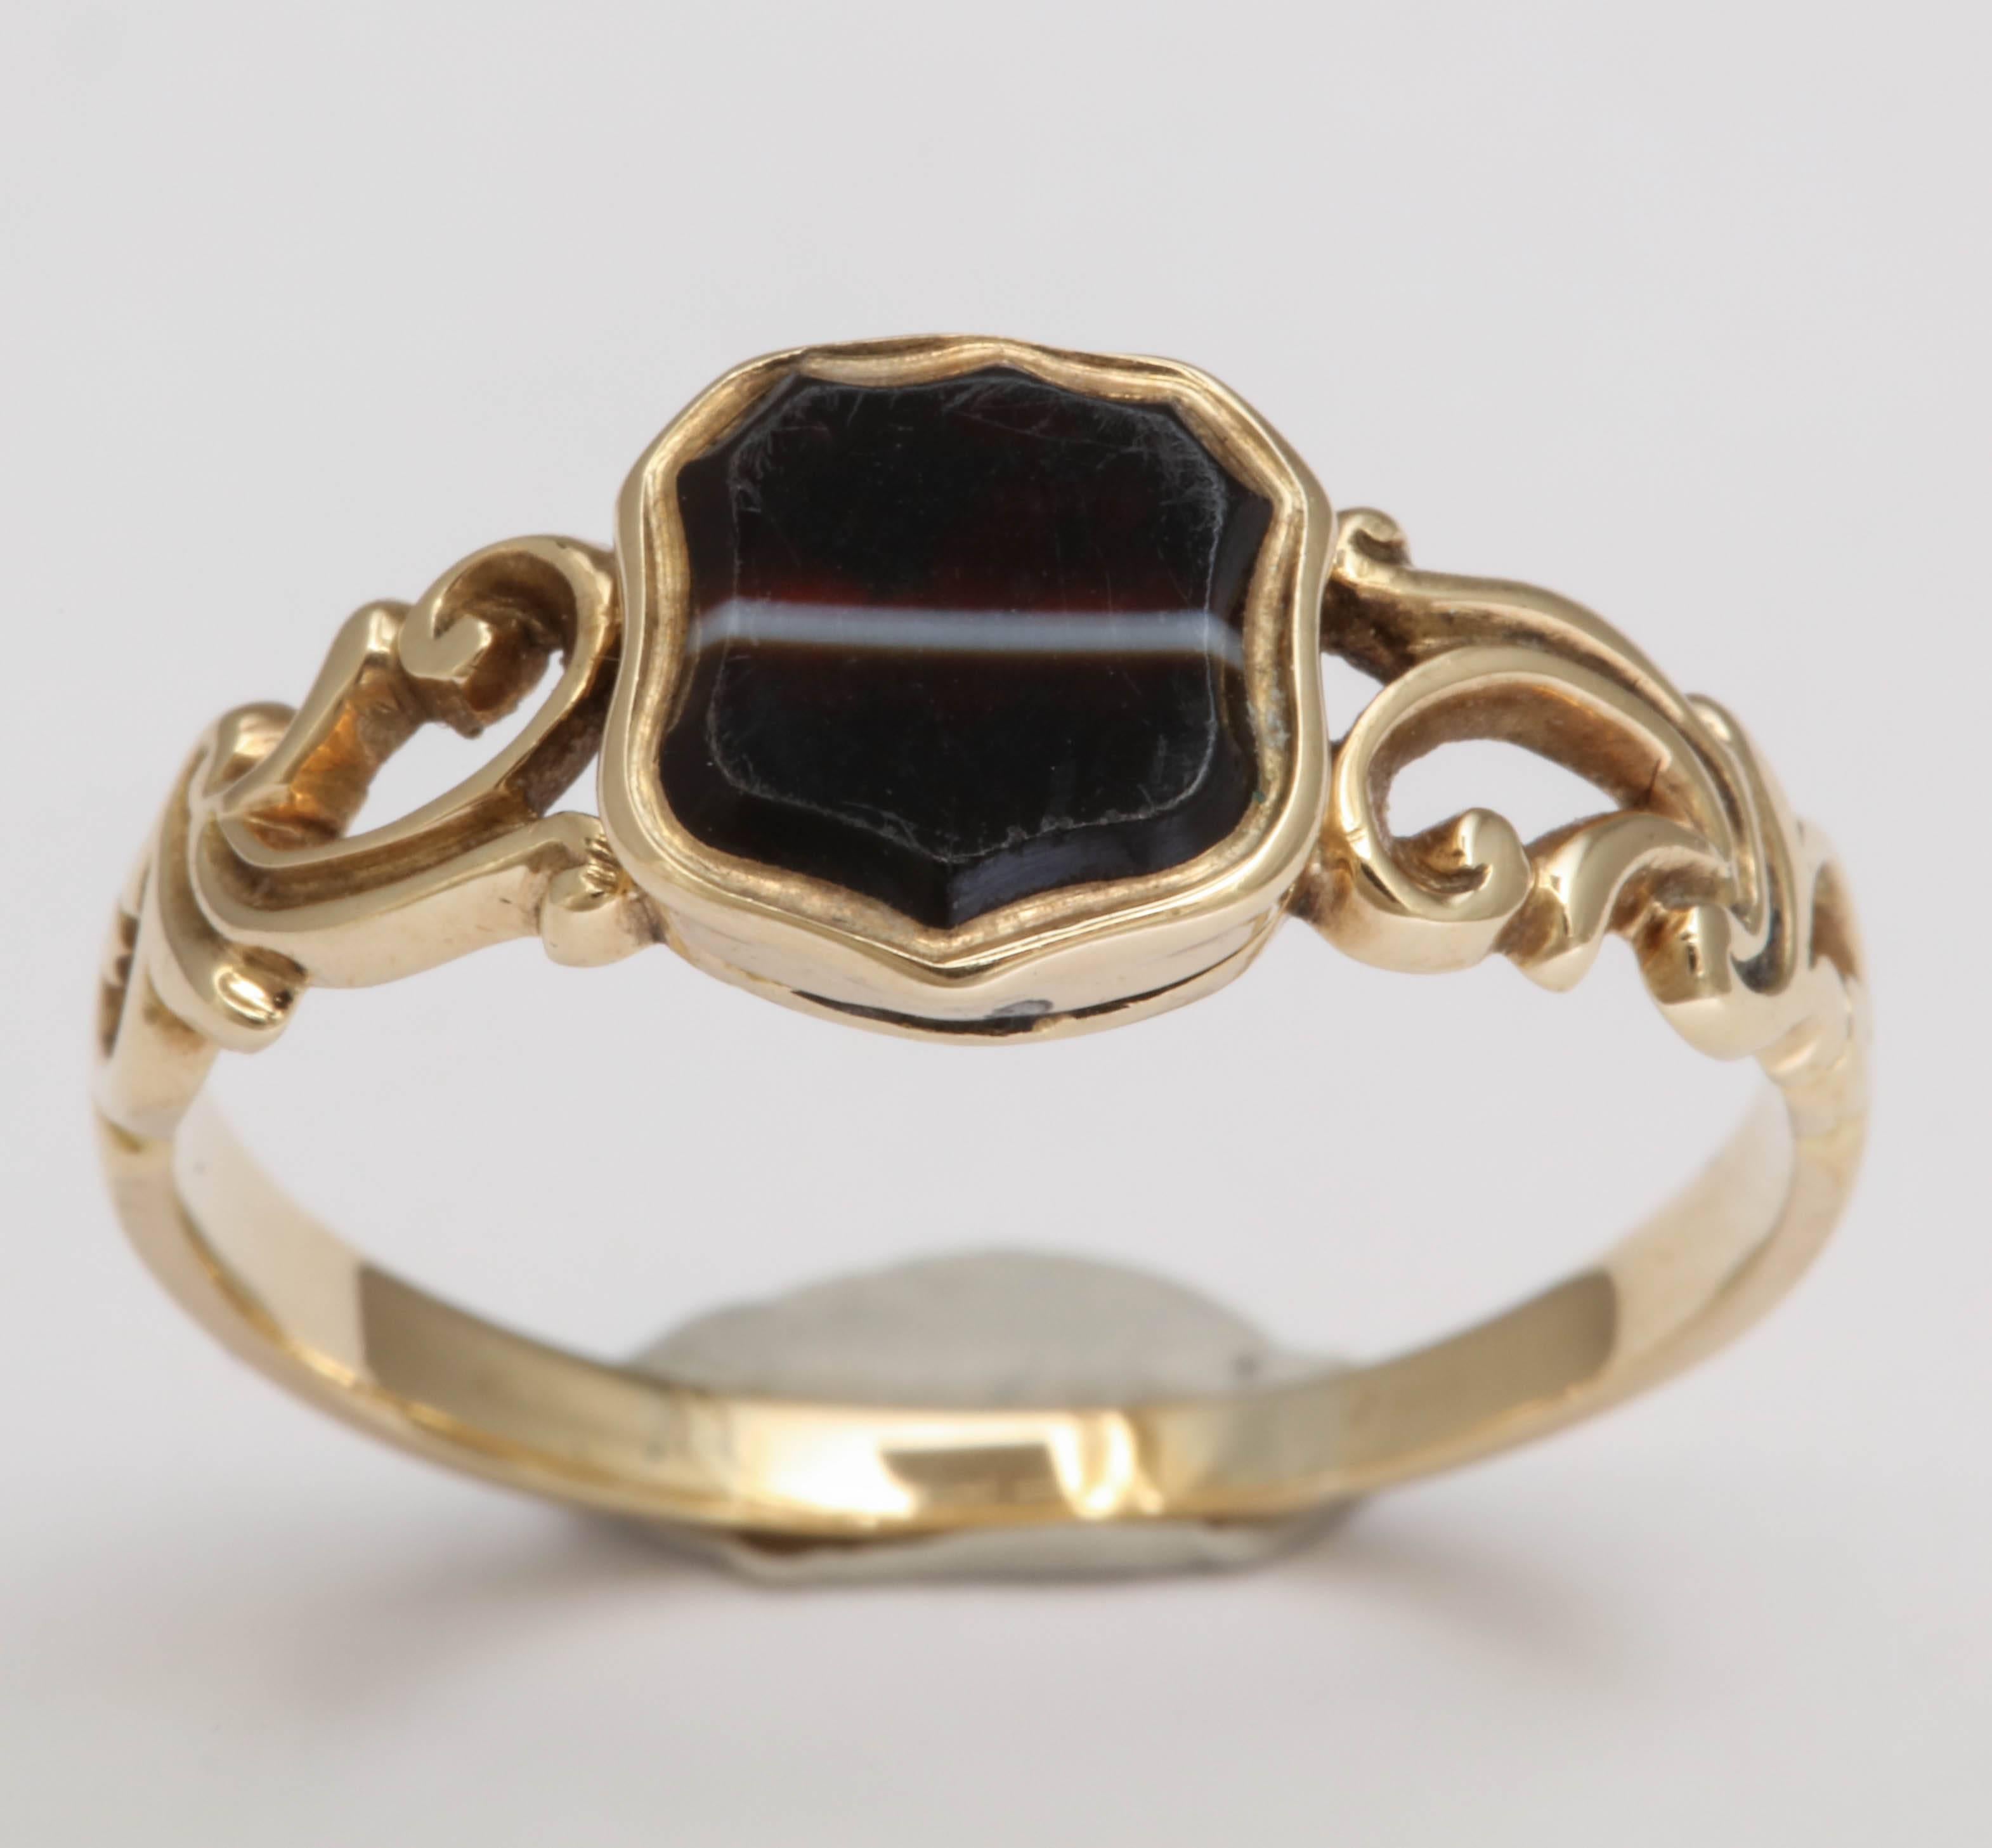 Victorian Banded Agate Shield Ring with Hidden Locket Compartment